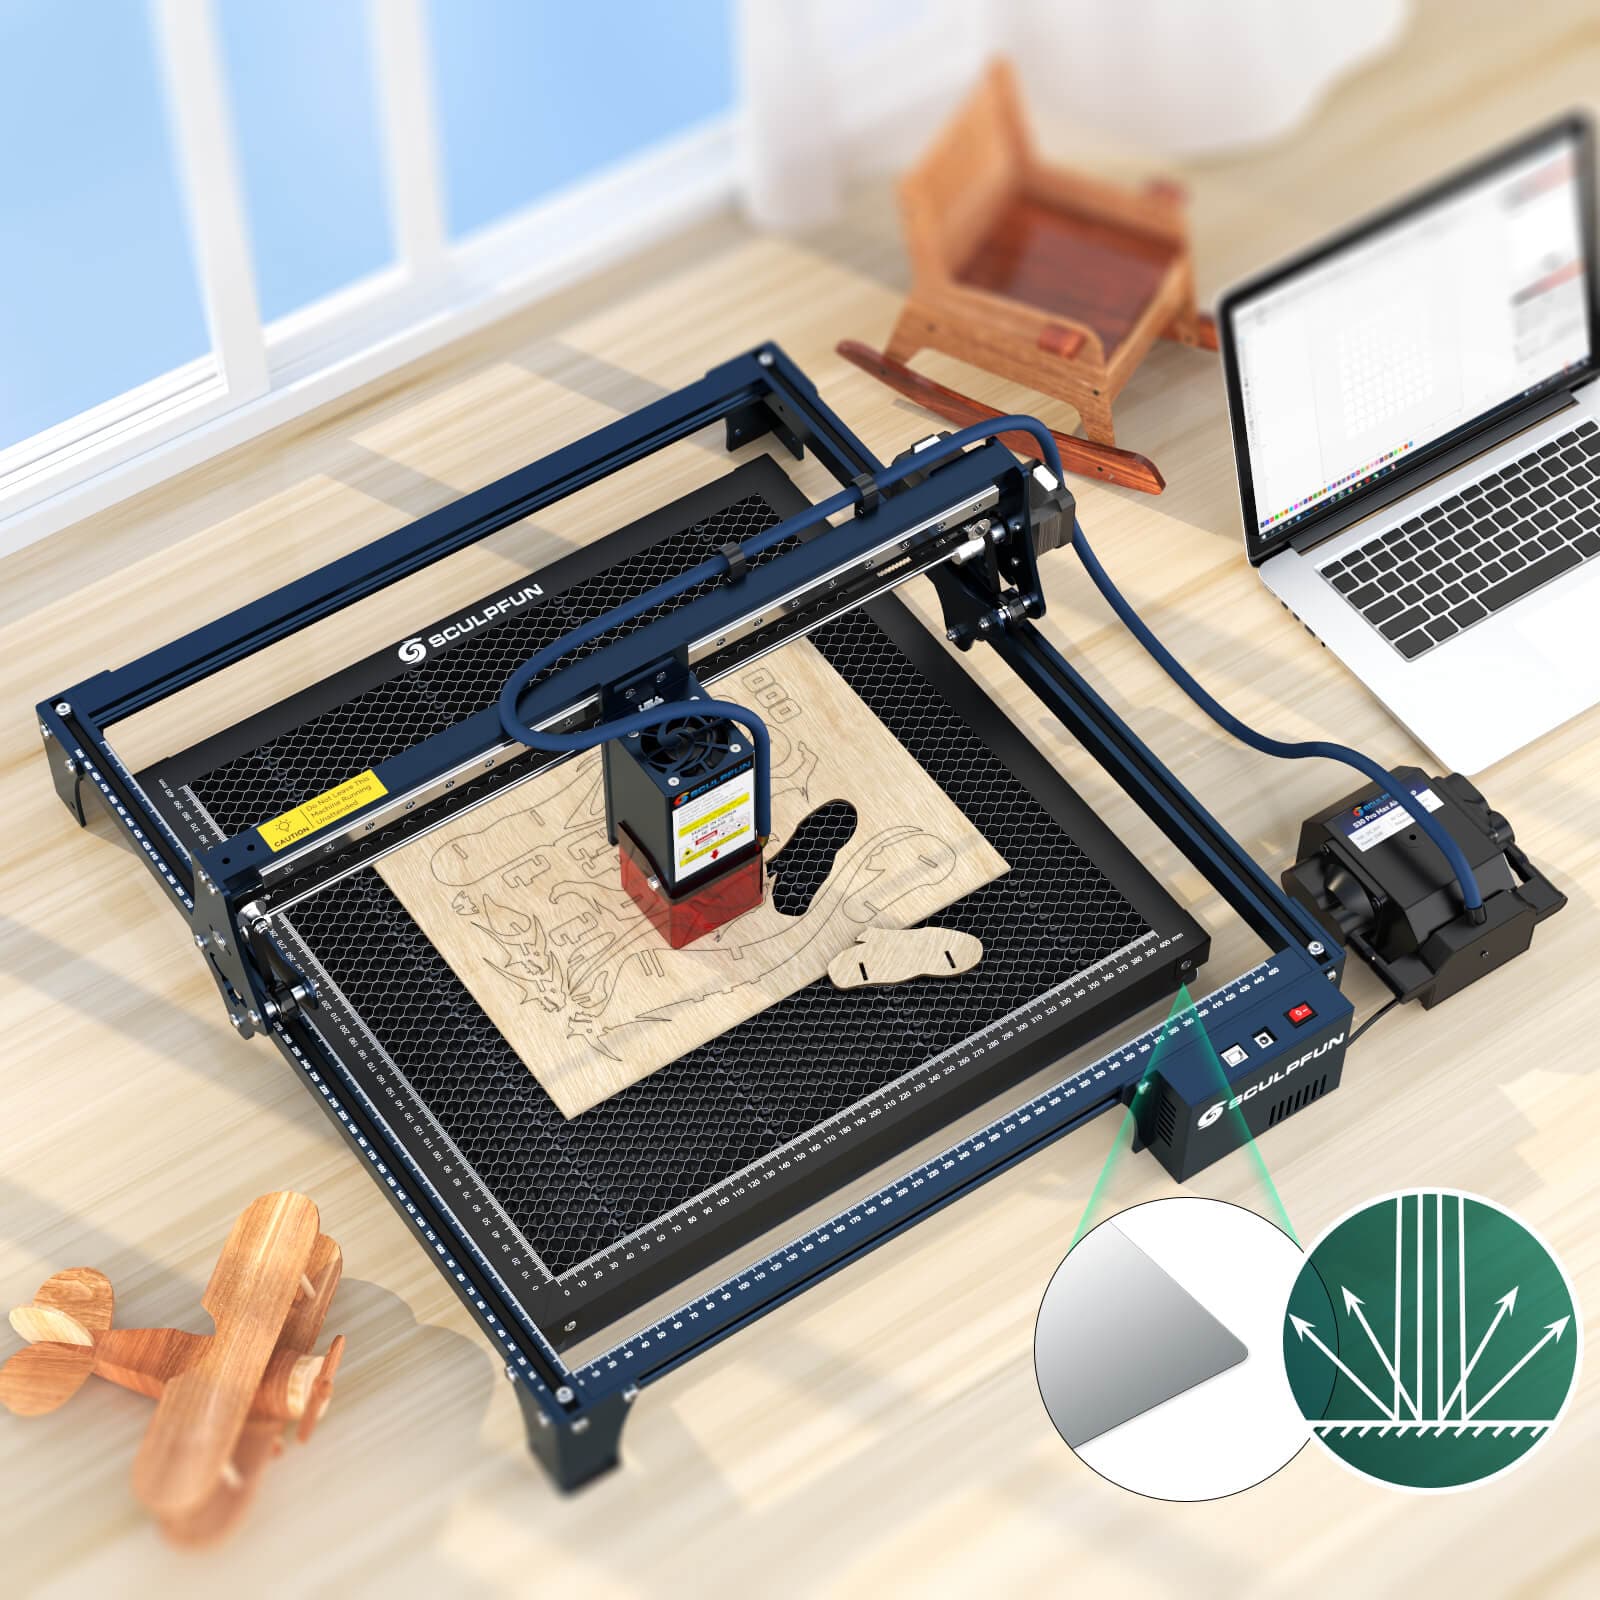 SCULPFUN S30 Ultra 22W Laser Engraver with Auto Air Assist and Honeycomb  Laser Bed 600x 600mm